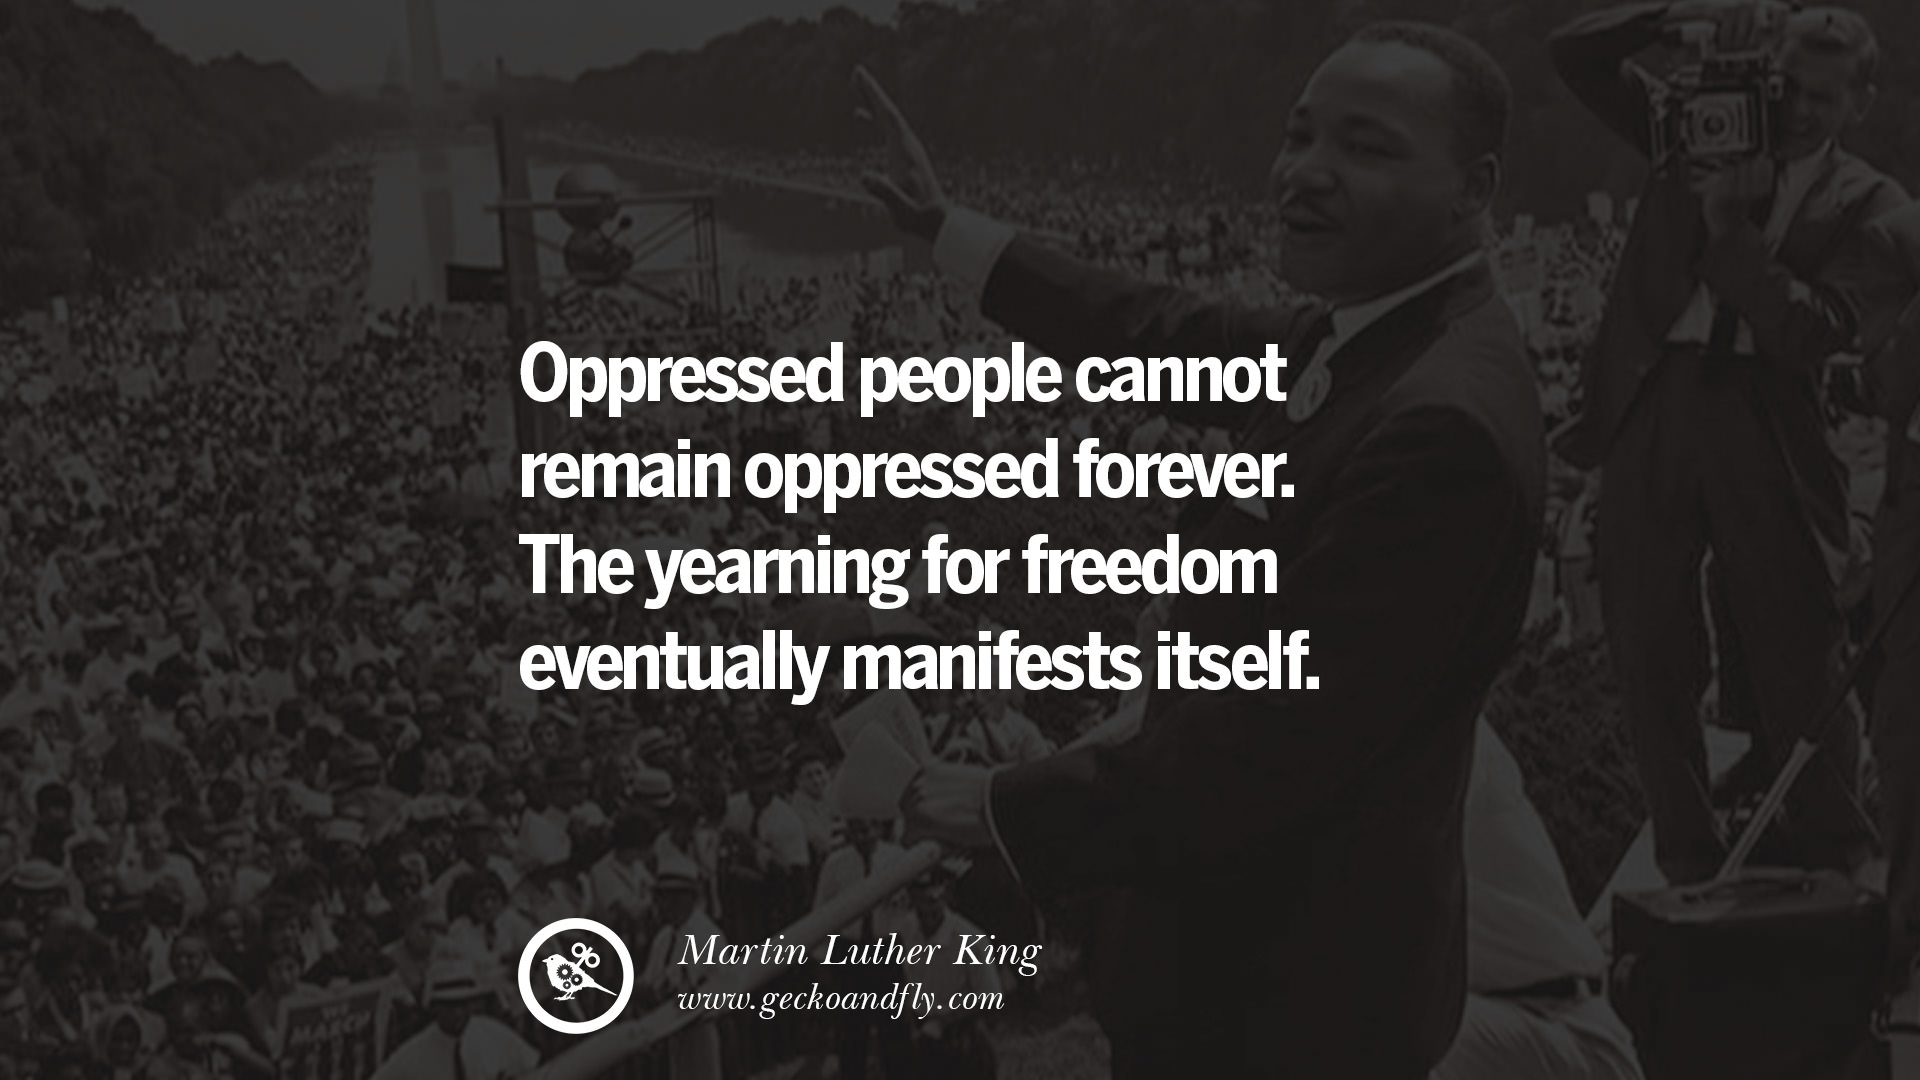 30 Powerful Martin Luther King Jr Quotes on Equality Rights, Black Lives Matter and More1920 x 1080